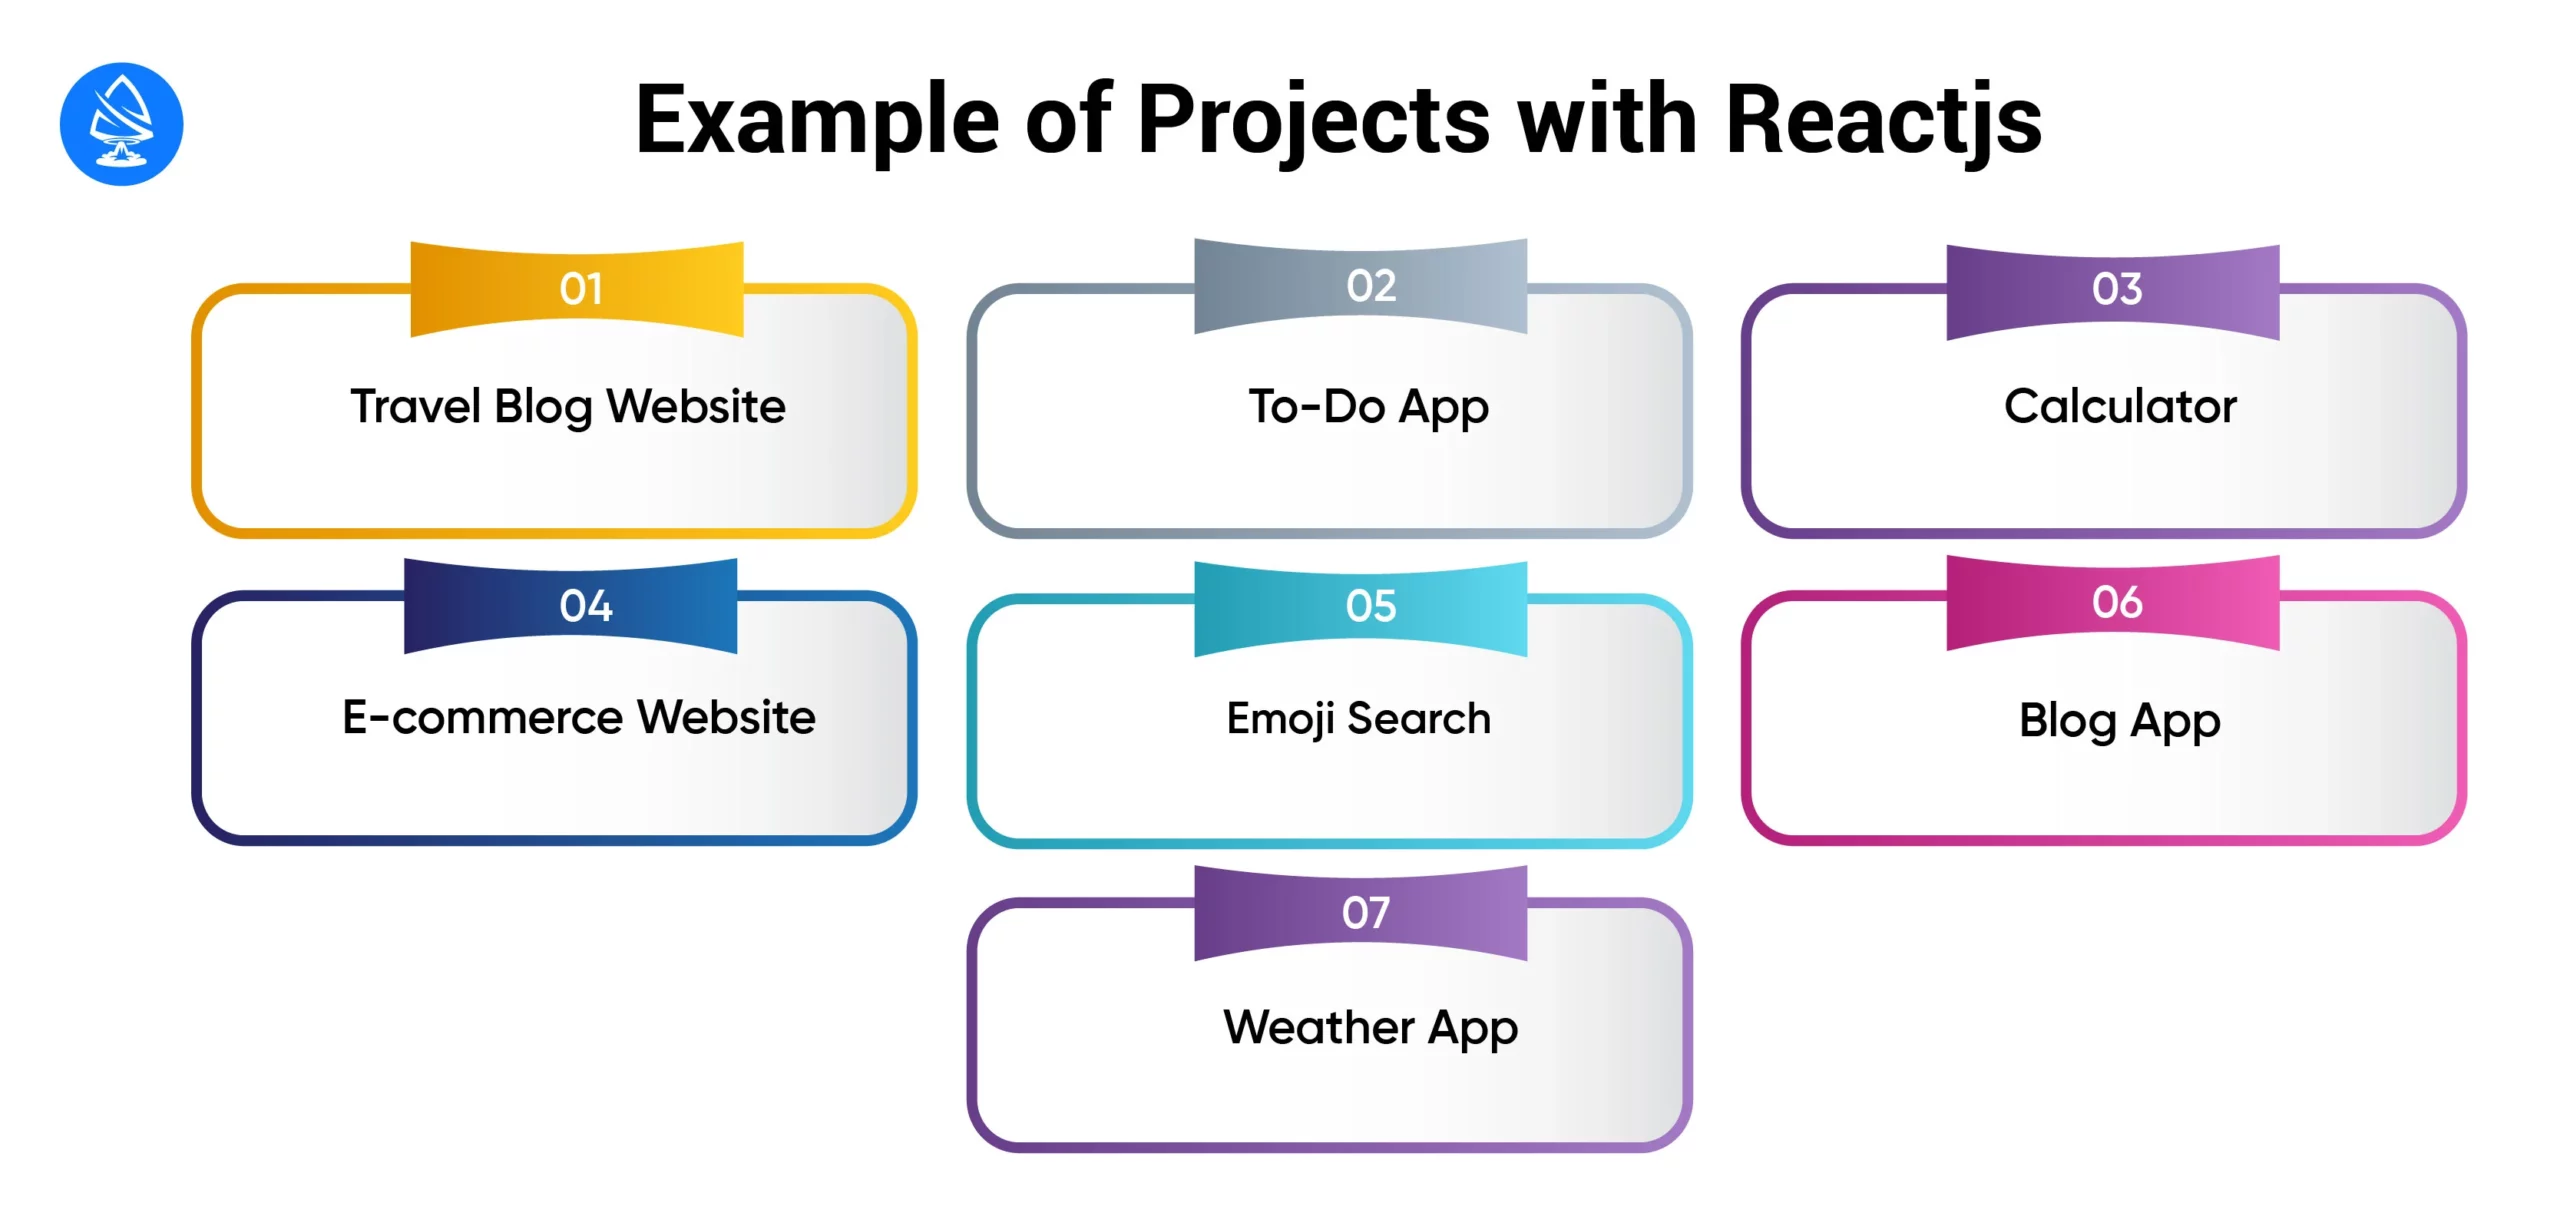 Examples of projects suited for React: